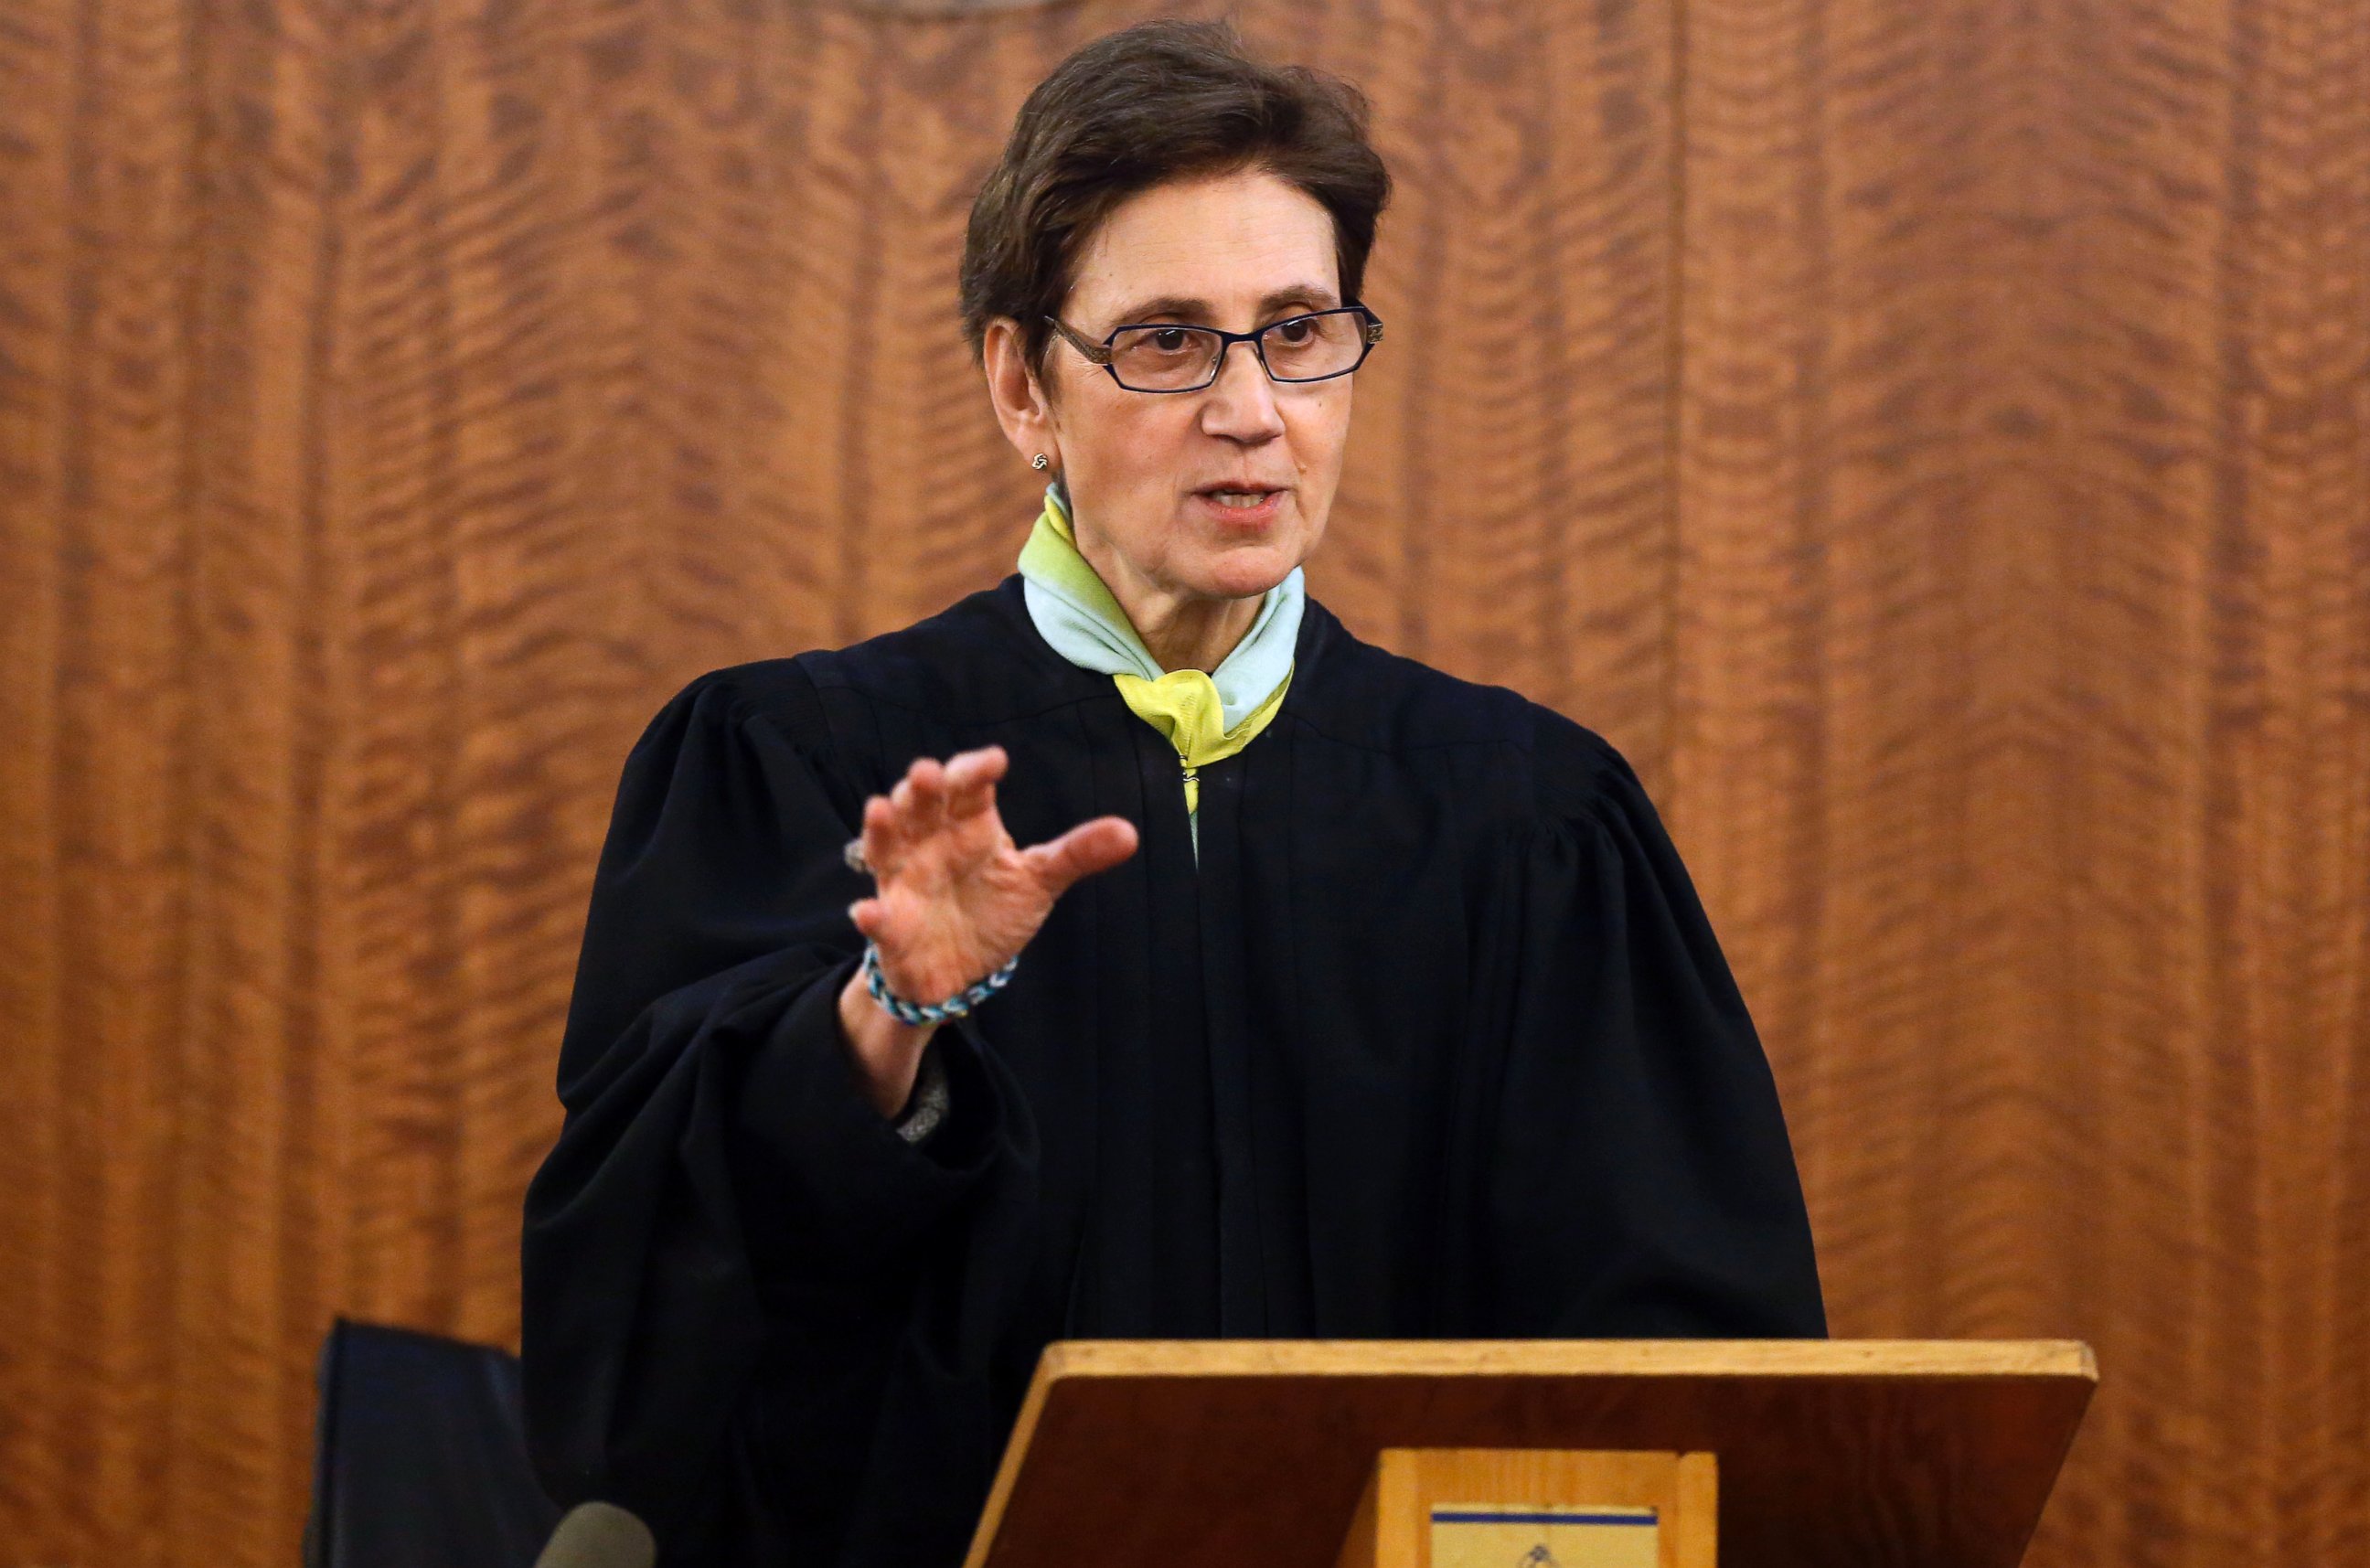 PHOTO: Superior Court Judge E. Susan Garsh instructs the jury during the murder trial for former New England Patriots football player Aaron Hernandez, on Jan. 29, 2015, in Fall River, Mass.